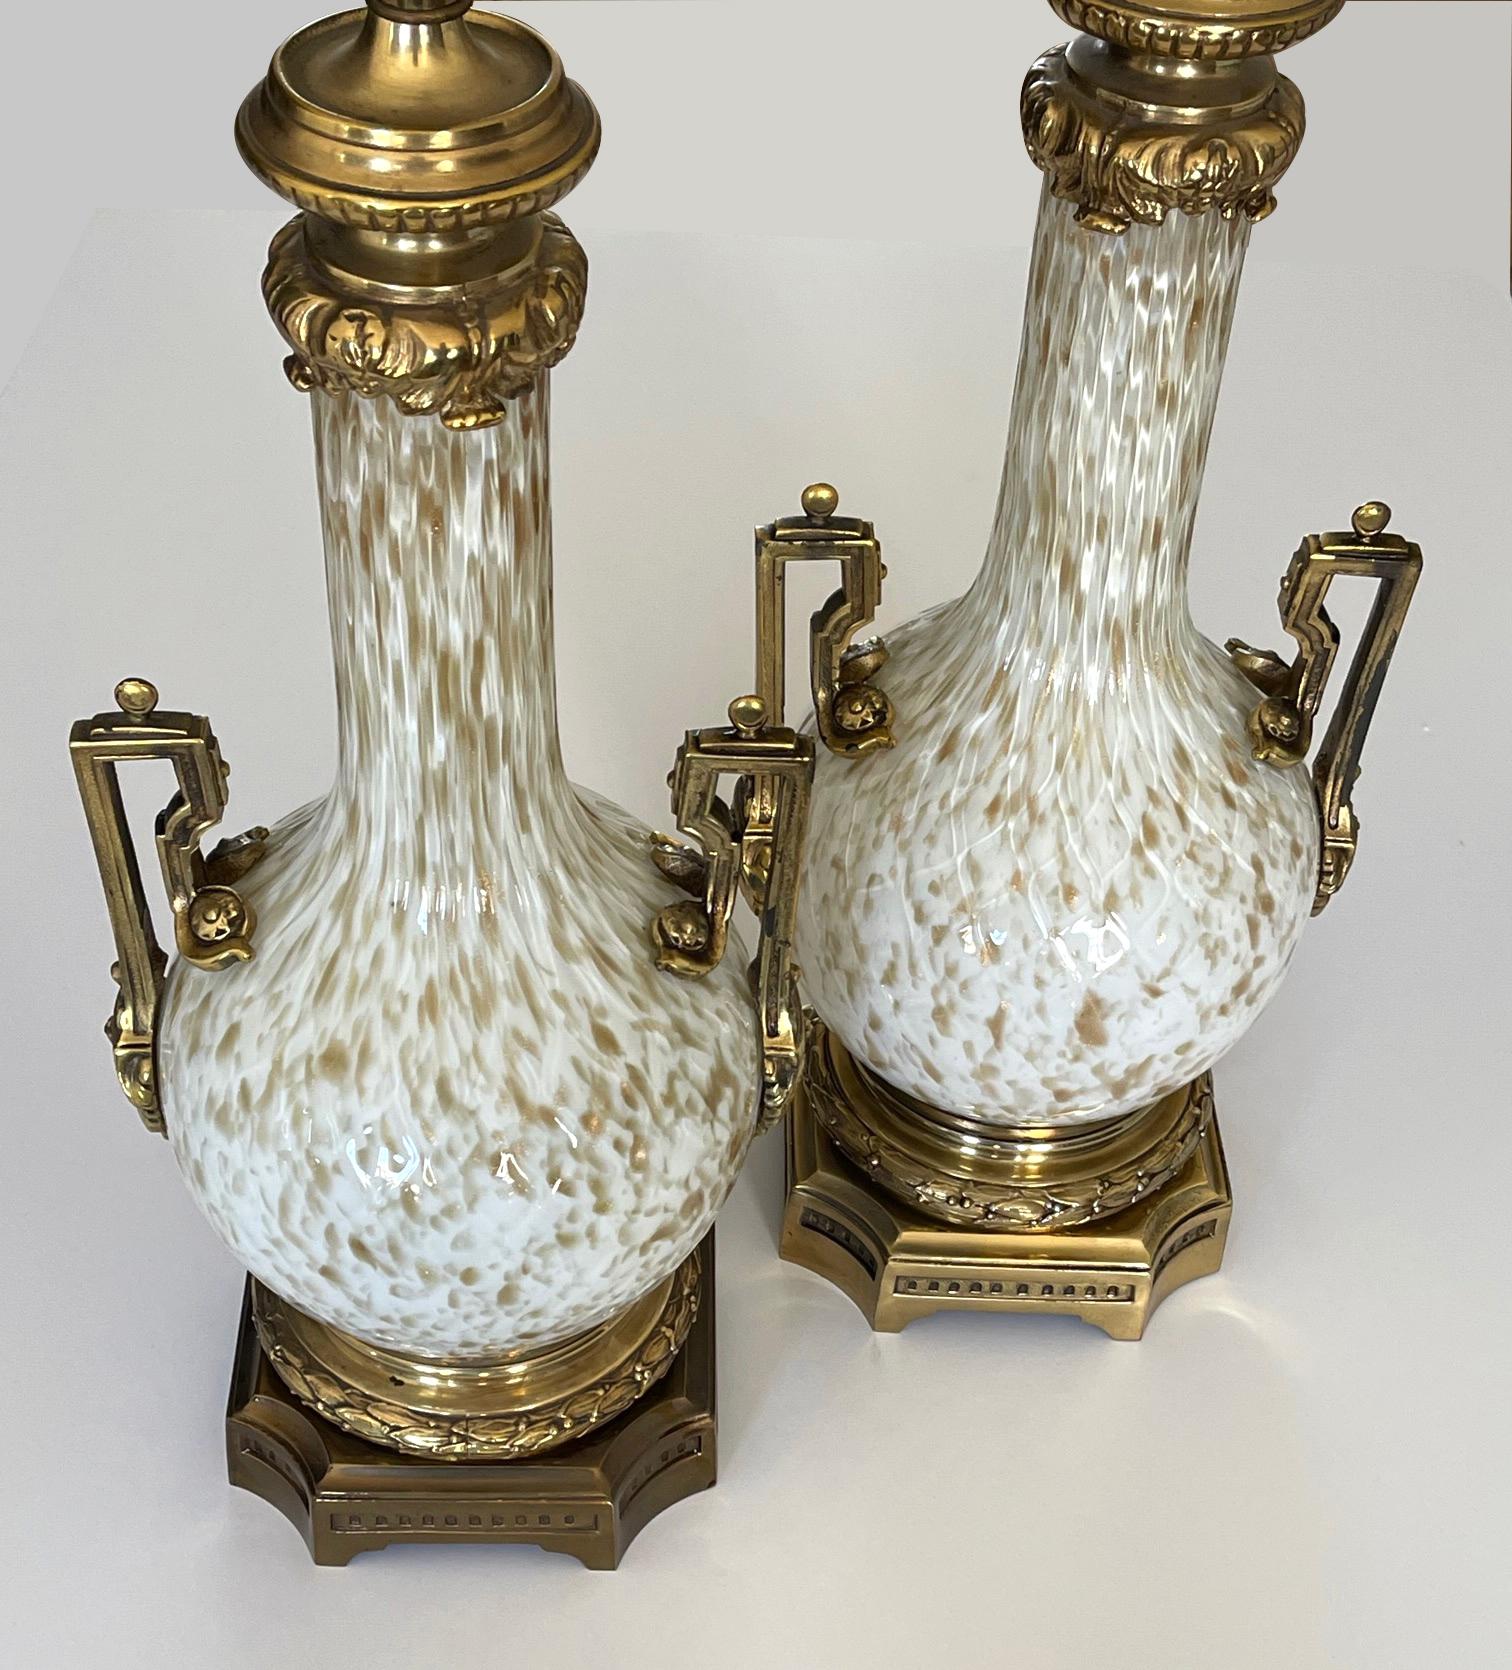 the white bottle-form Murano lamp with gold inclusions fitted with brass mounts.